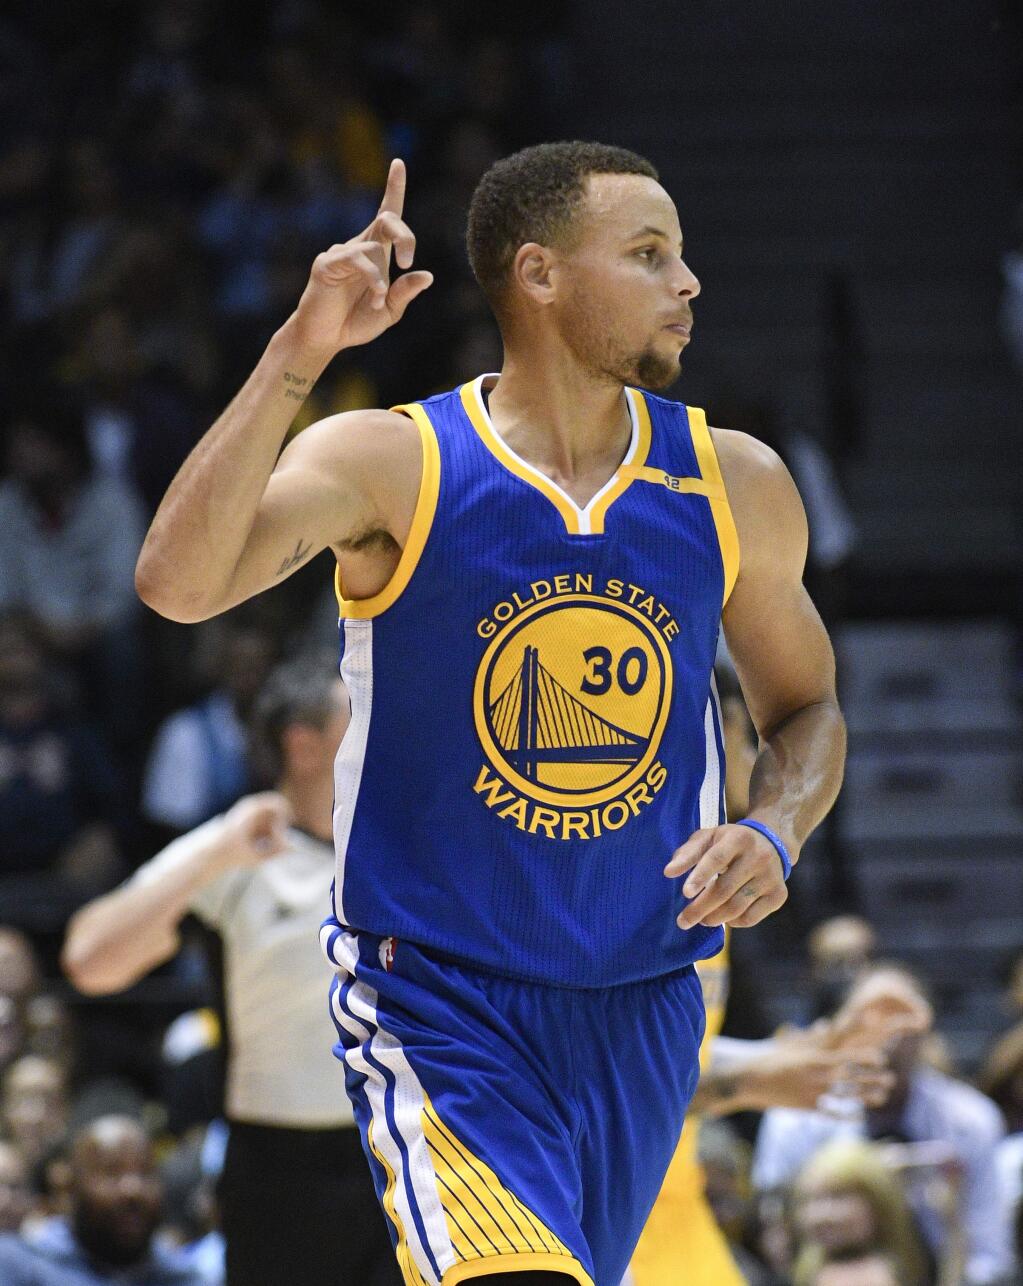 Golden State Warriors guard Stephen Curry gestures after hitting a 3-pointer during the second half of an NBA preseason basketball game against the Los Angeles Lakers Wednesday, Oct. 19, 2016, in San Diego. (AP Photo/Denis Poroy)